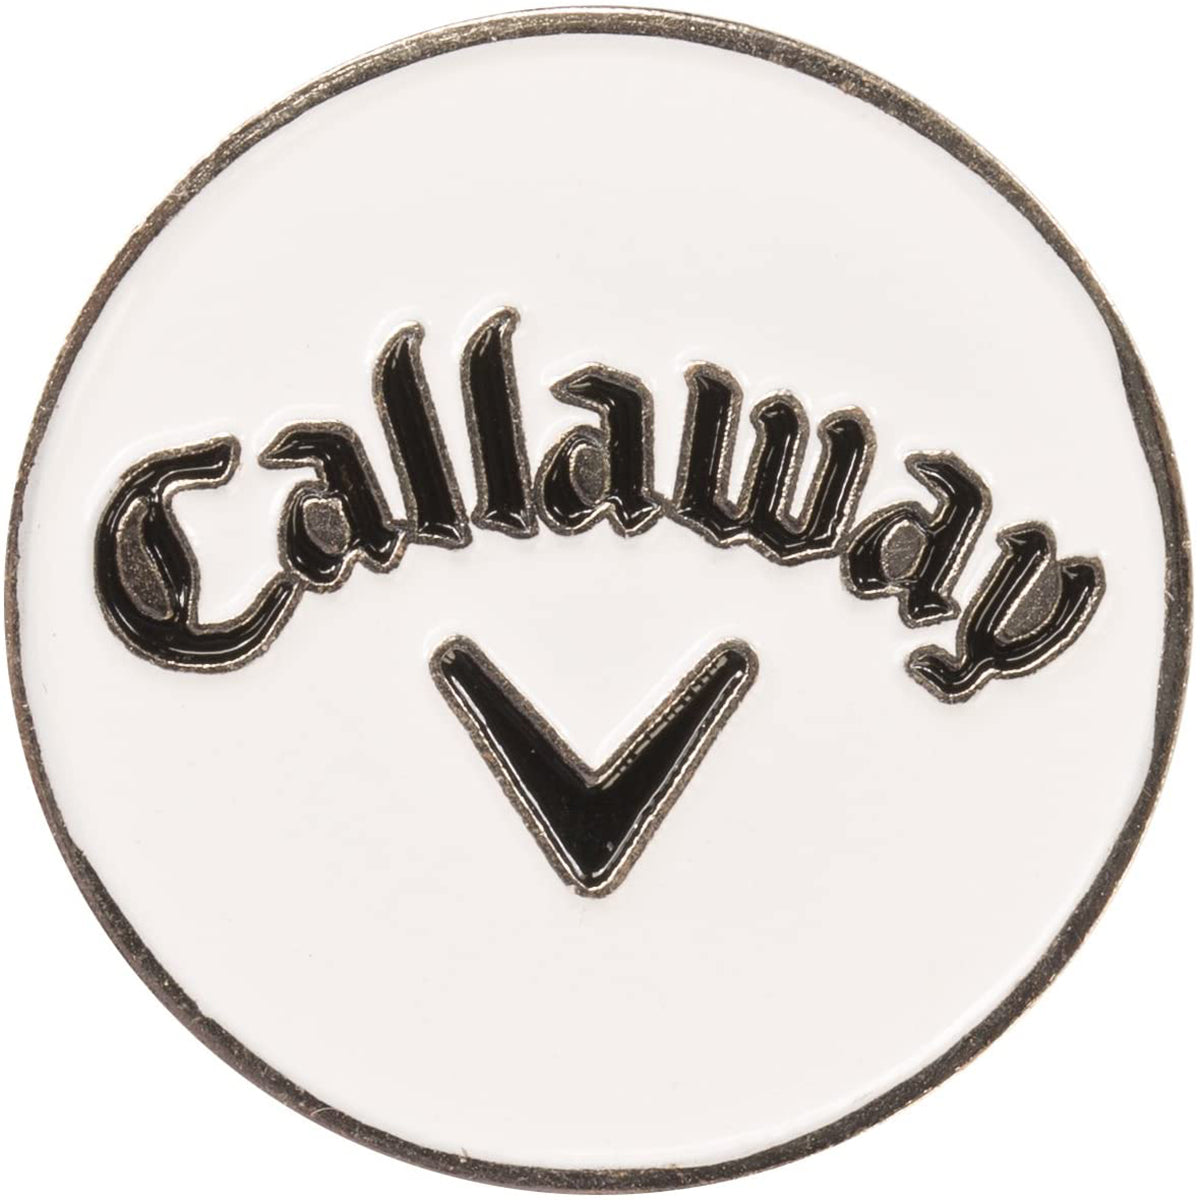 Callaway Golf Hat Clip and Ball Marker - Black/White Callaway